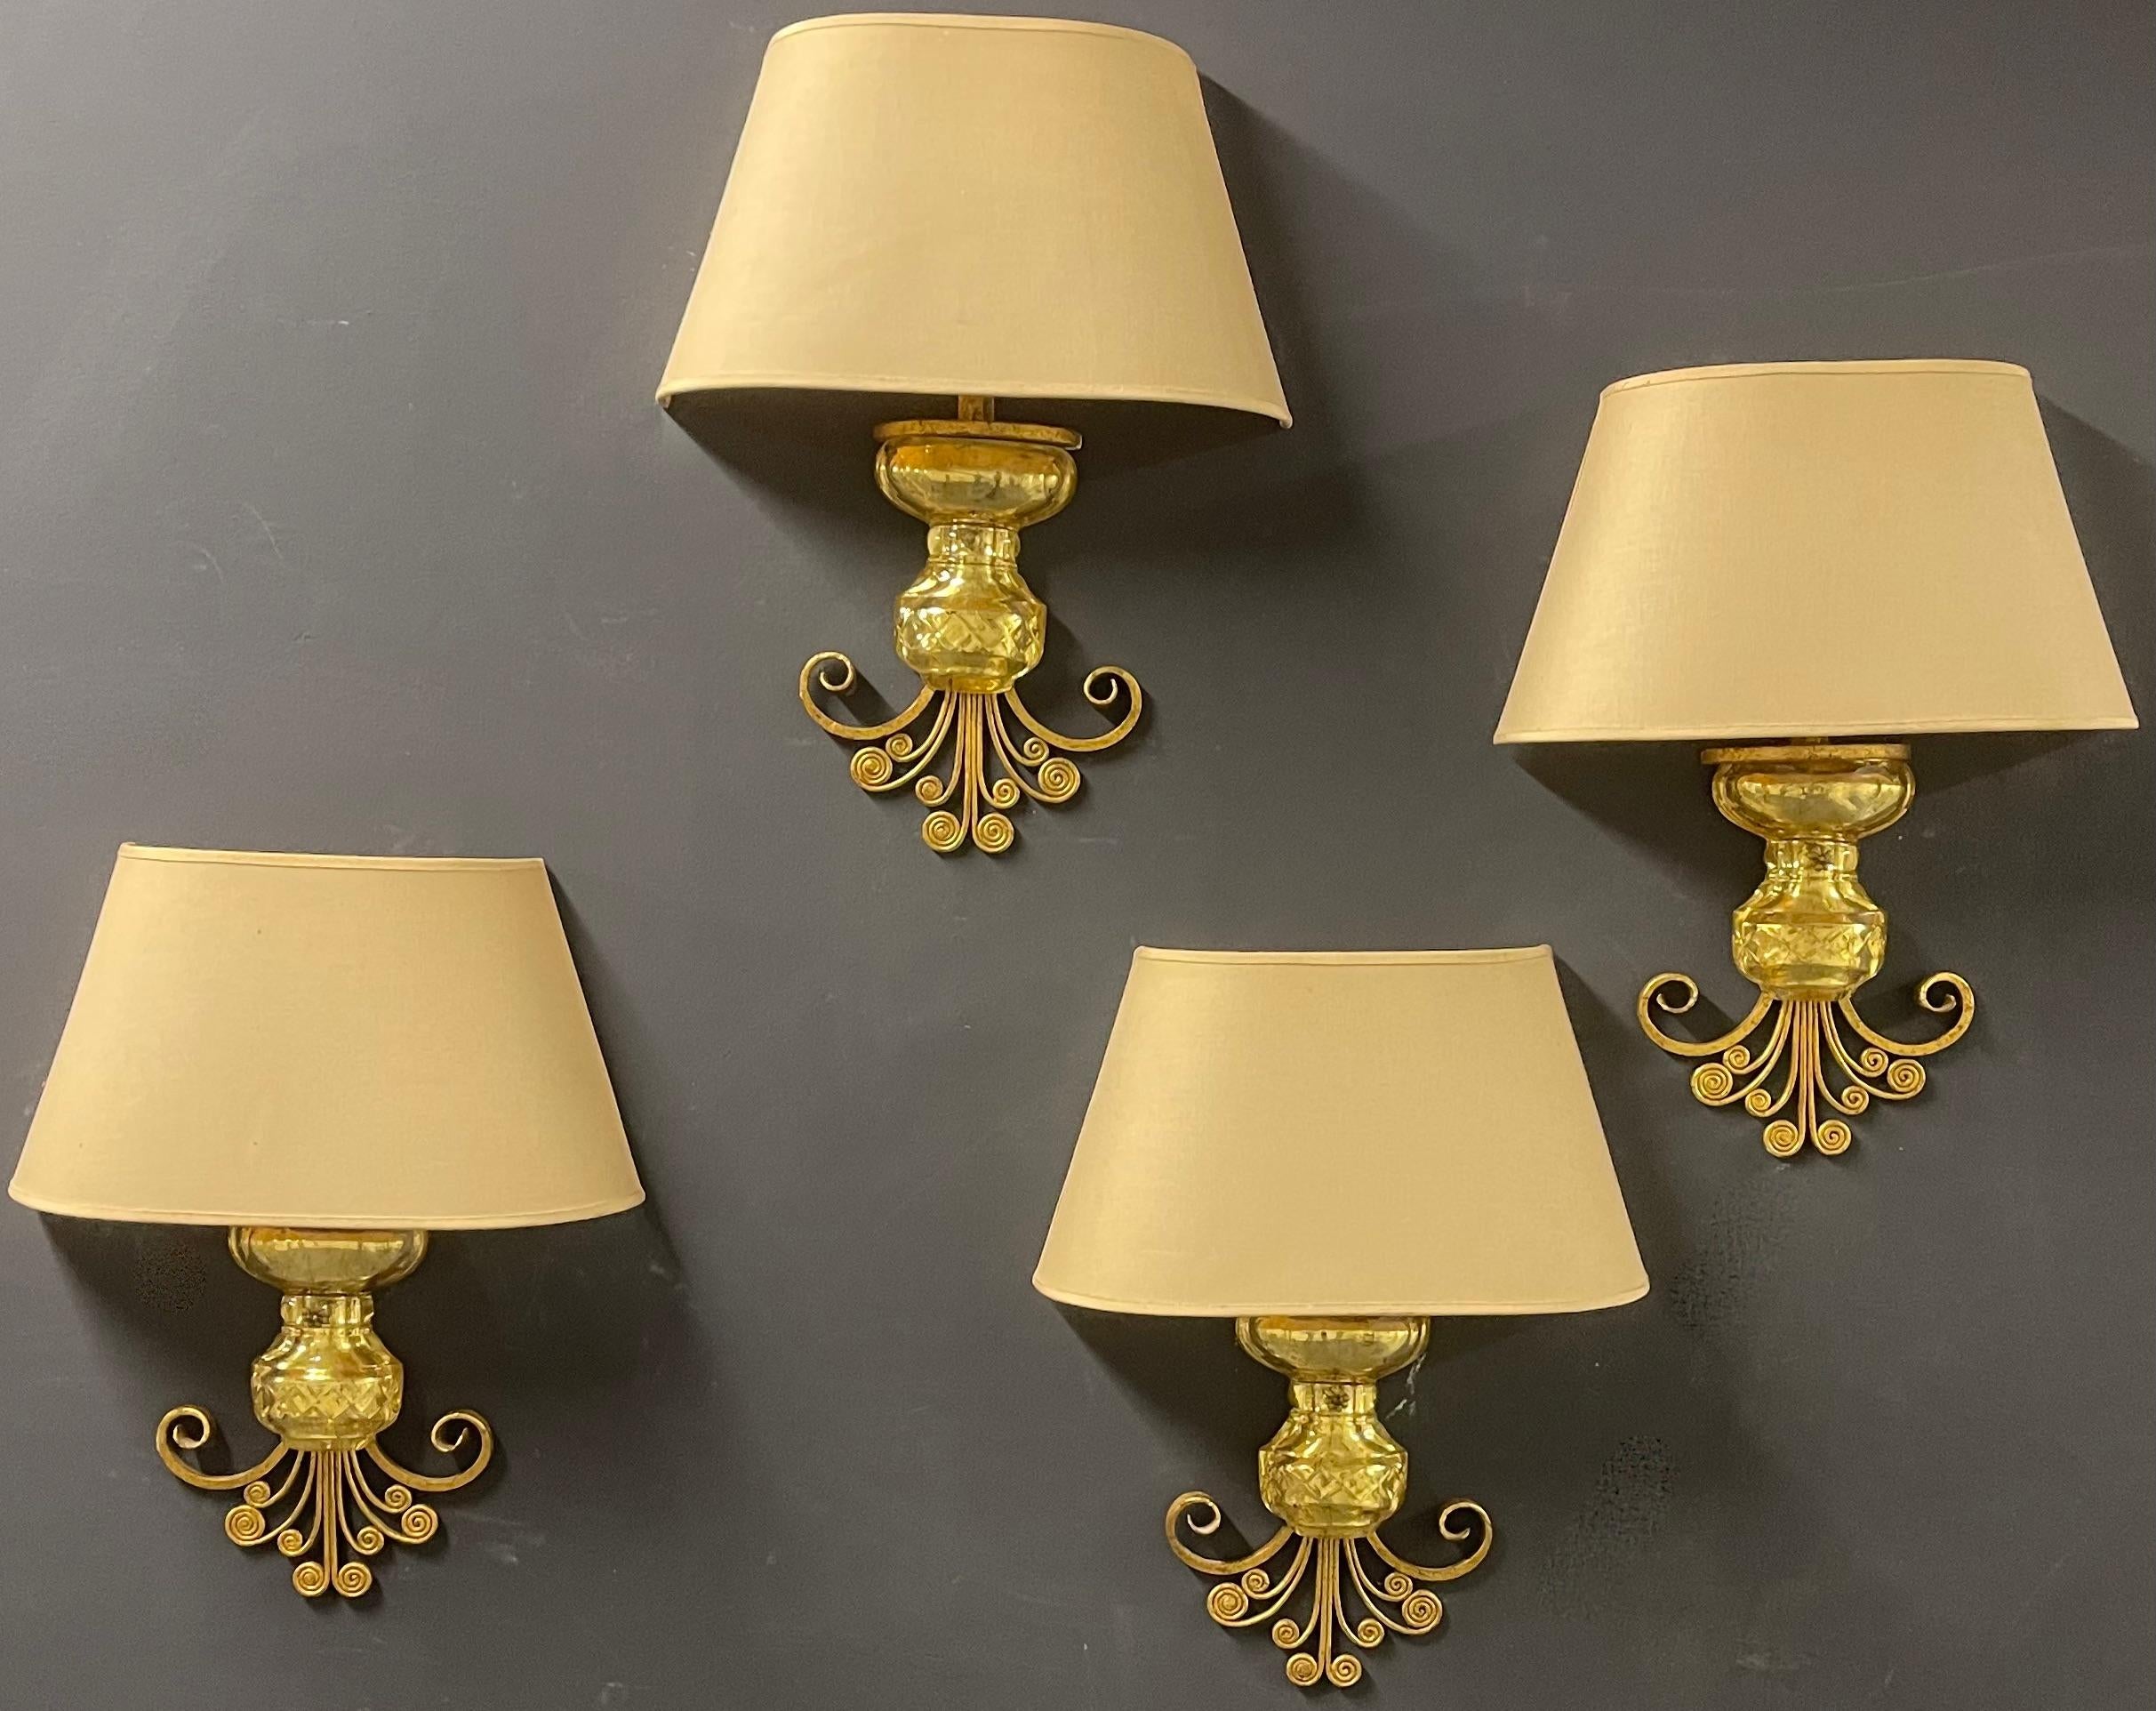 Very unusual Maison Baguès wall scones gilded metal and crystal. With original shades.